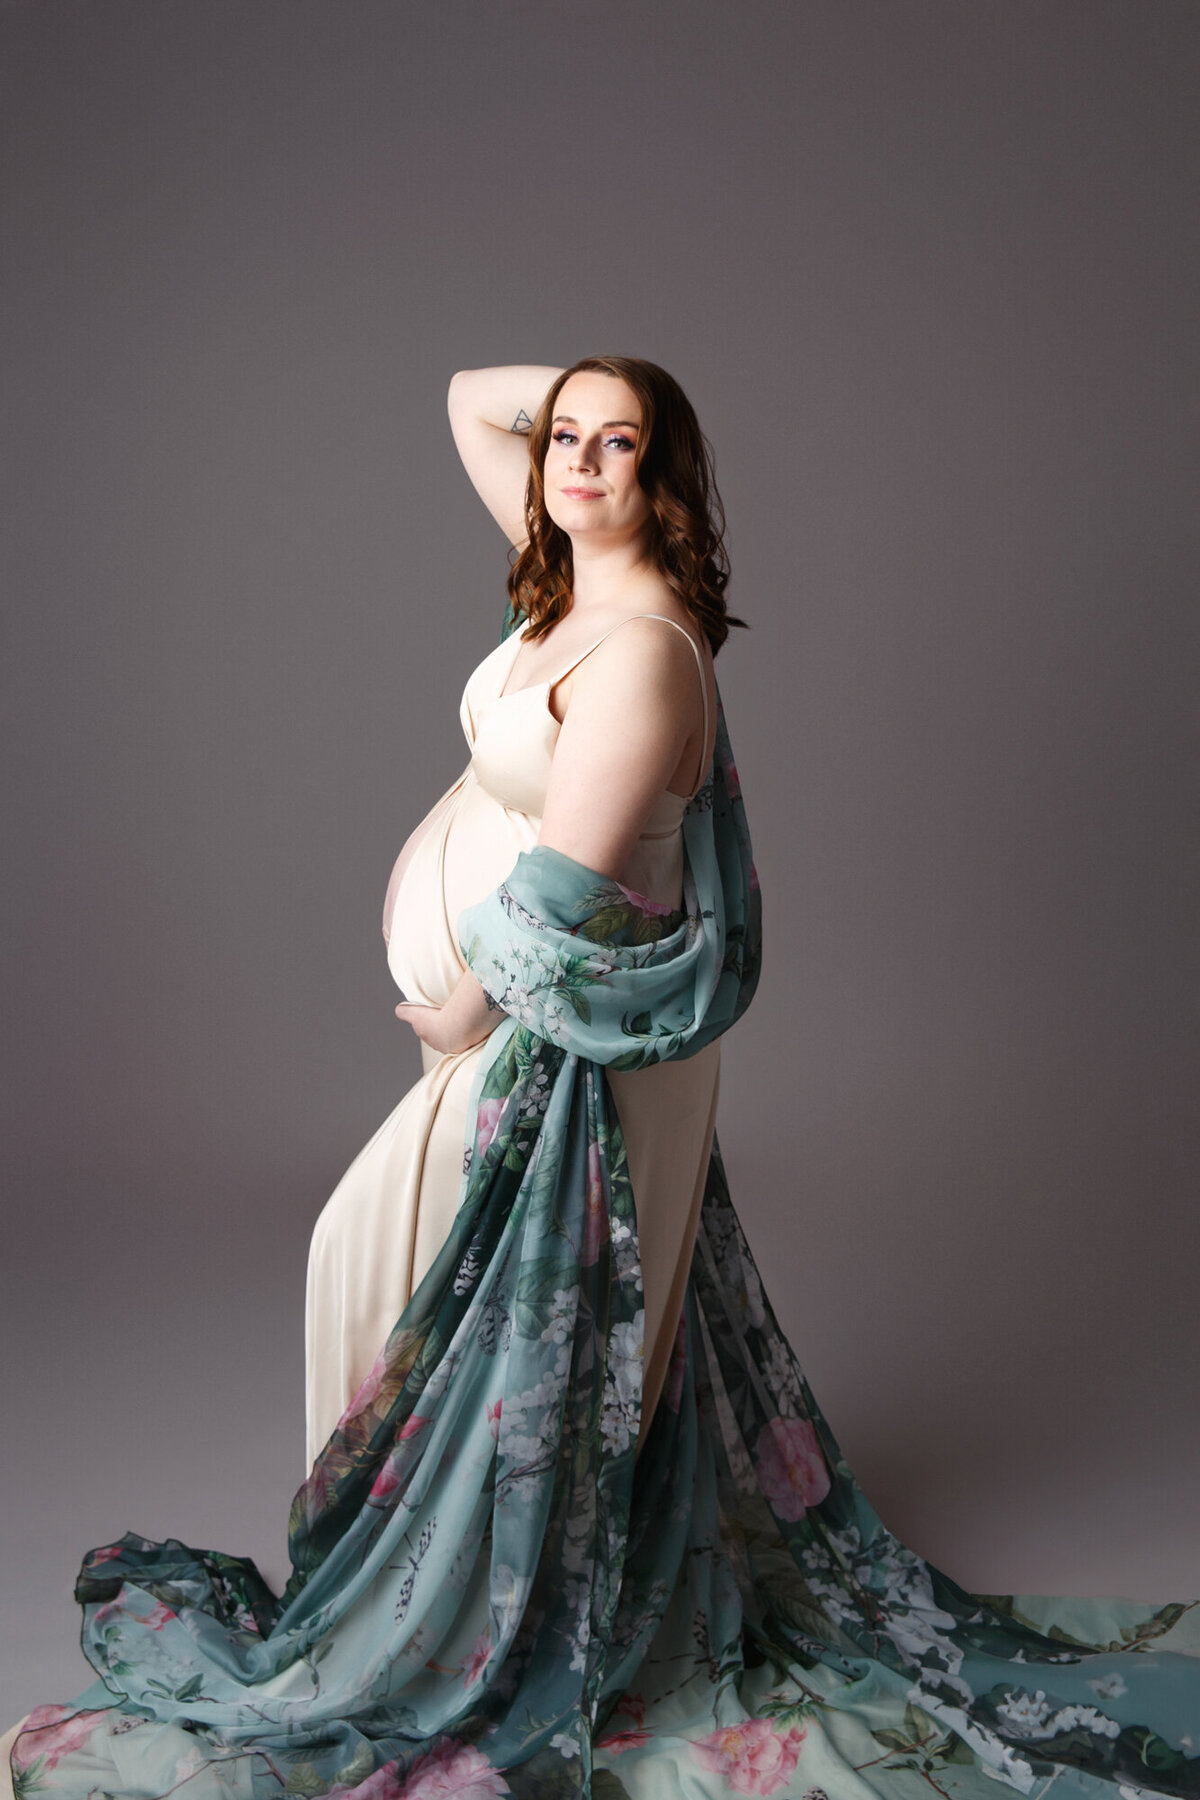 Full body portrait of a w pregnant woman wearing a gold dress with a green floral scarf wraped in her arms and photographed on a dark gray background